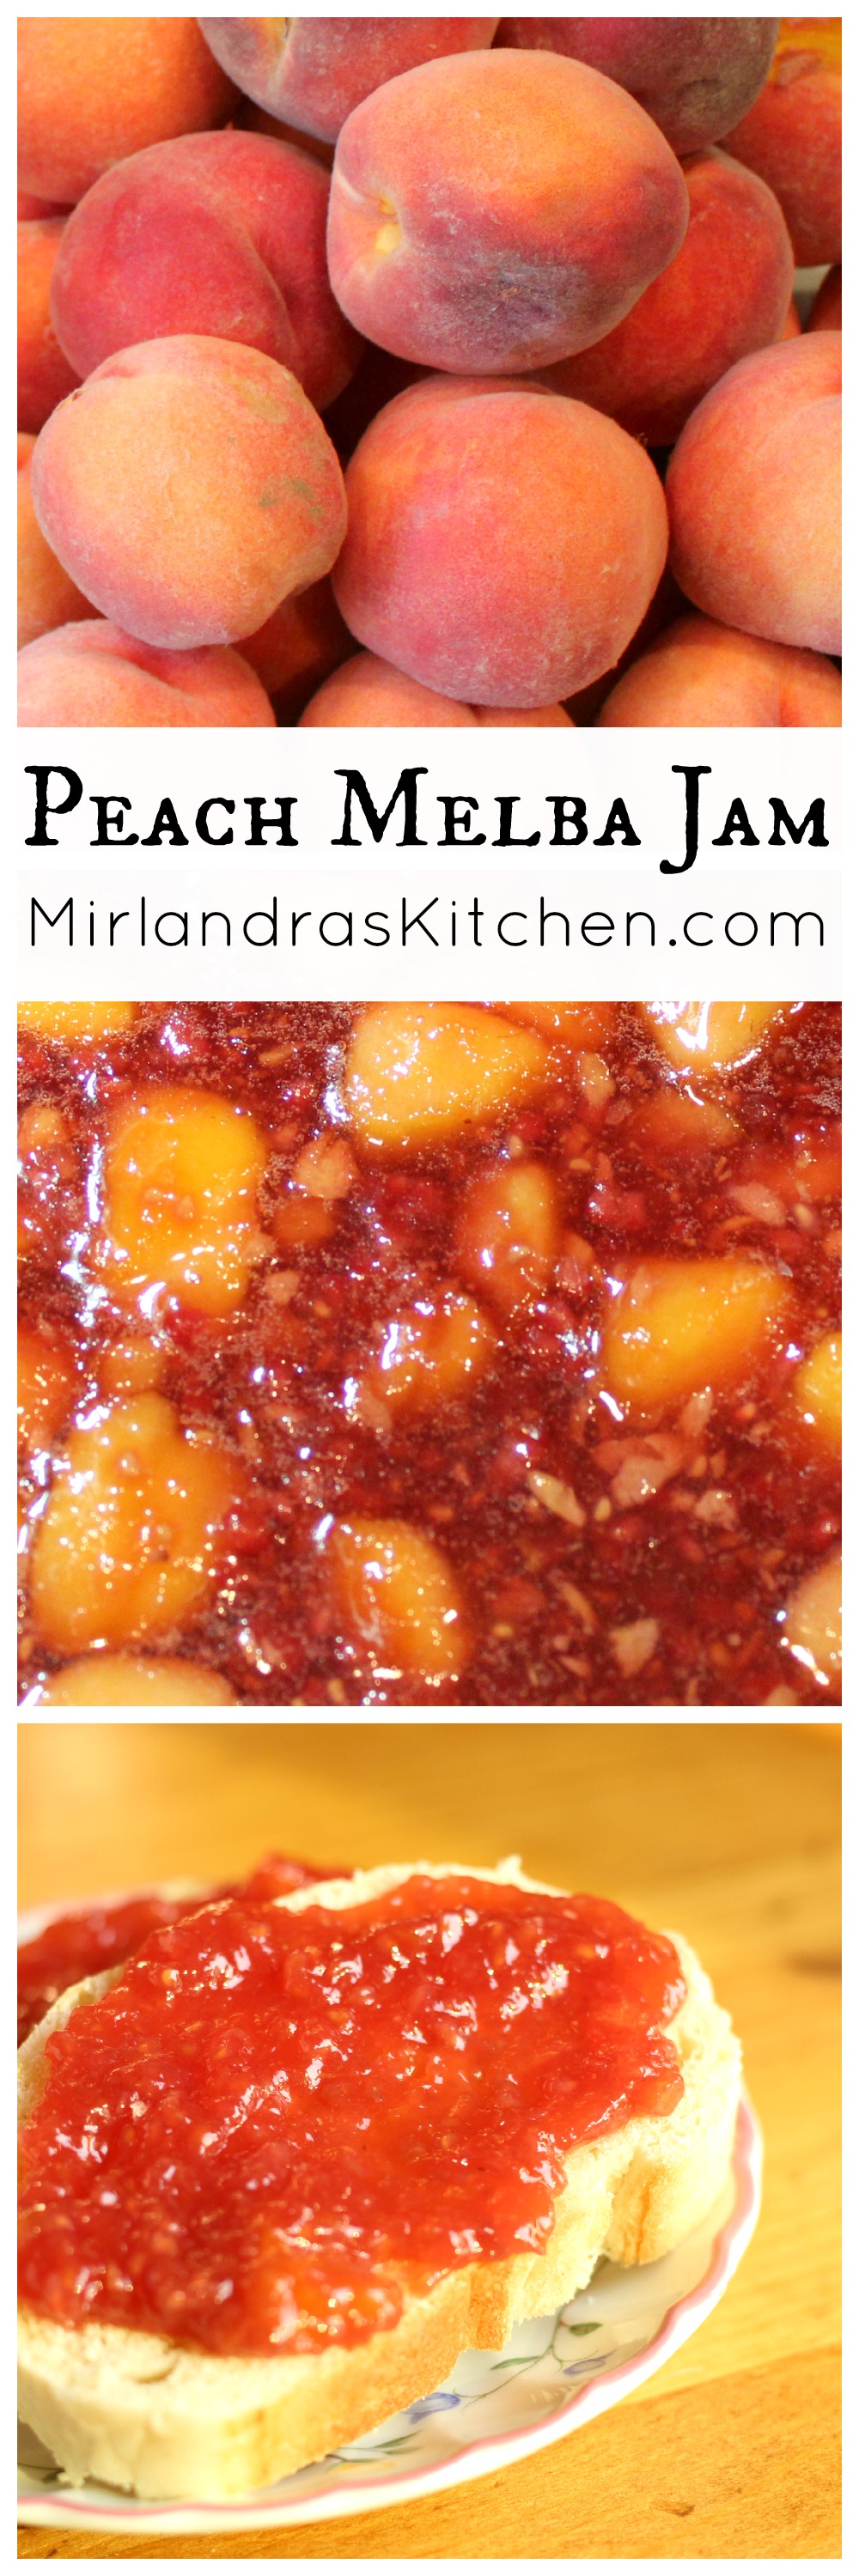 This classic Peach Melba Jam is a great mix of peaches and raspberries. It is one of my favorite jams. Instructions for canning the jam are included.